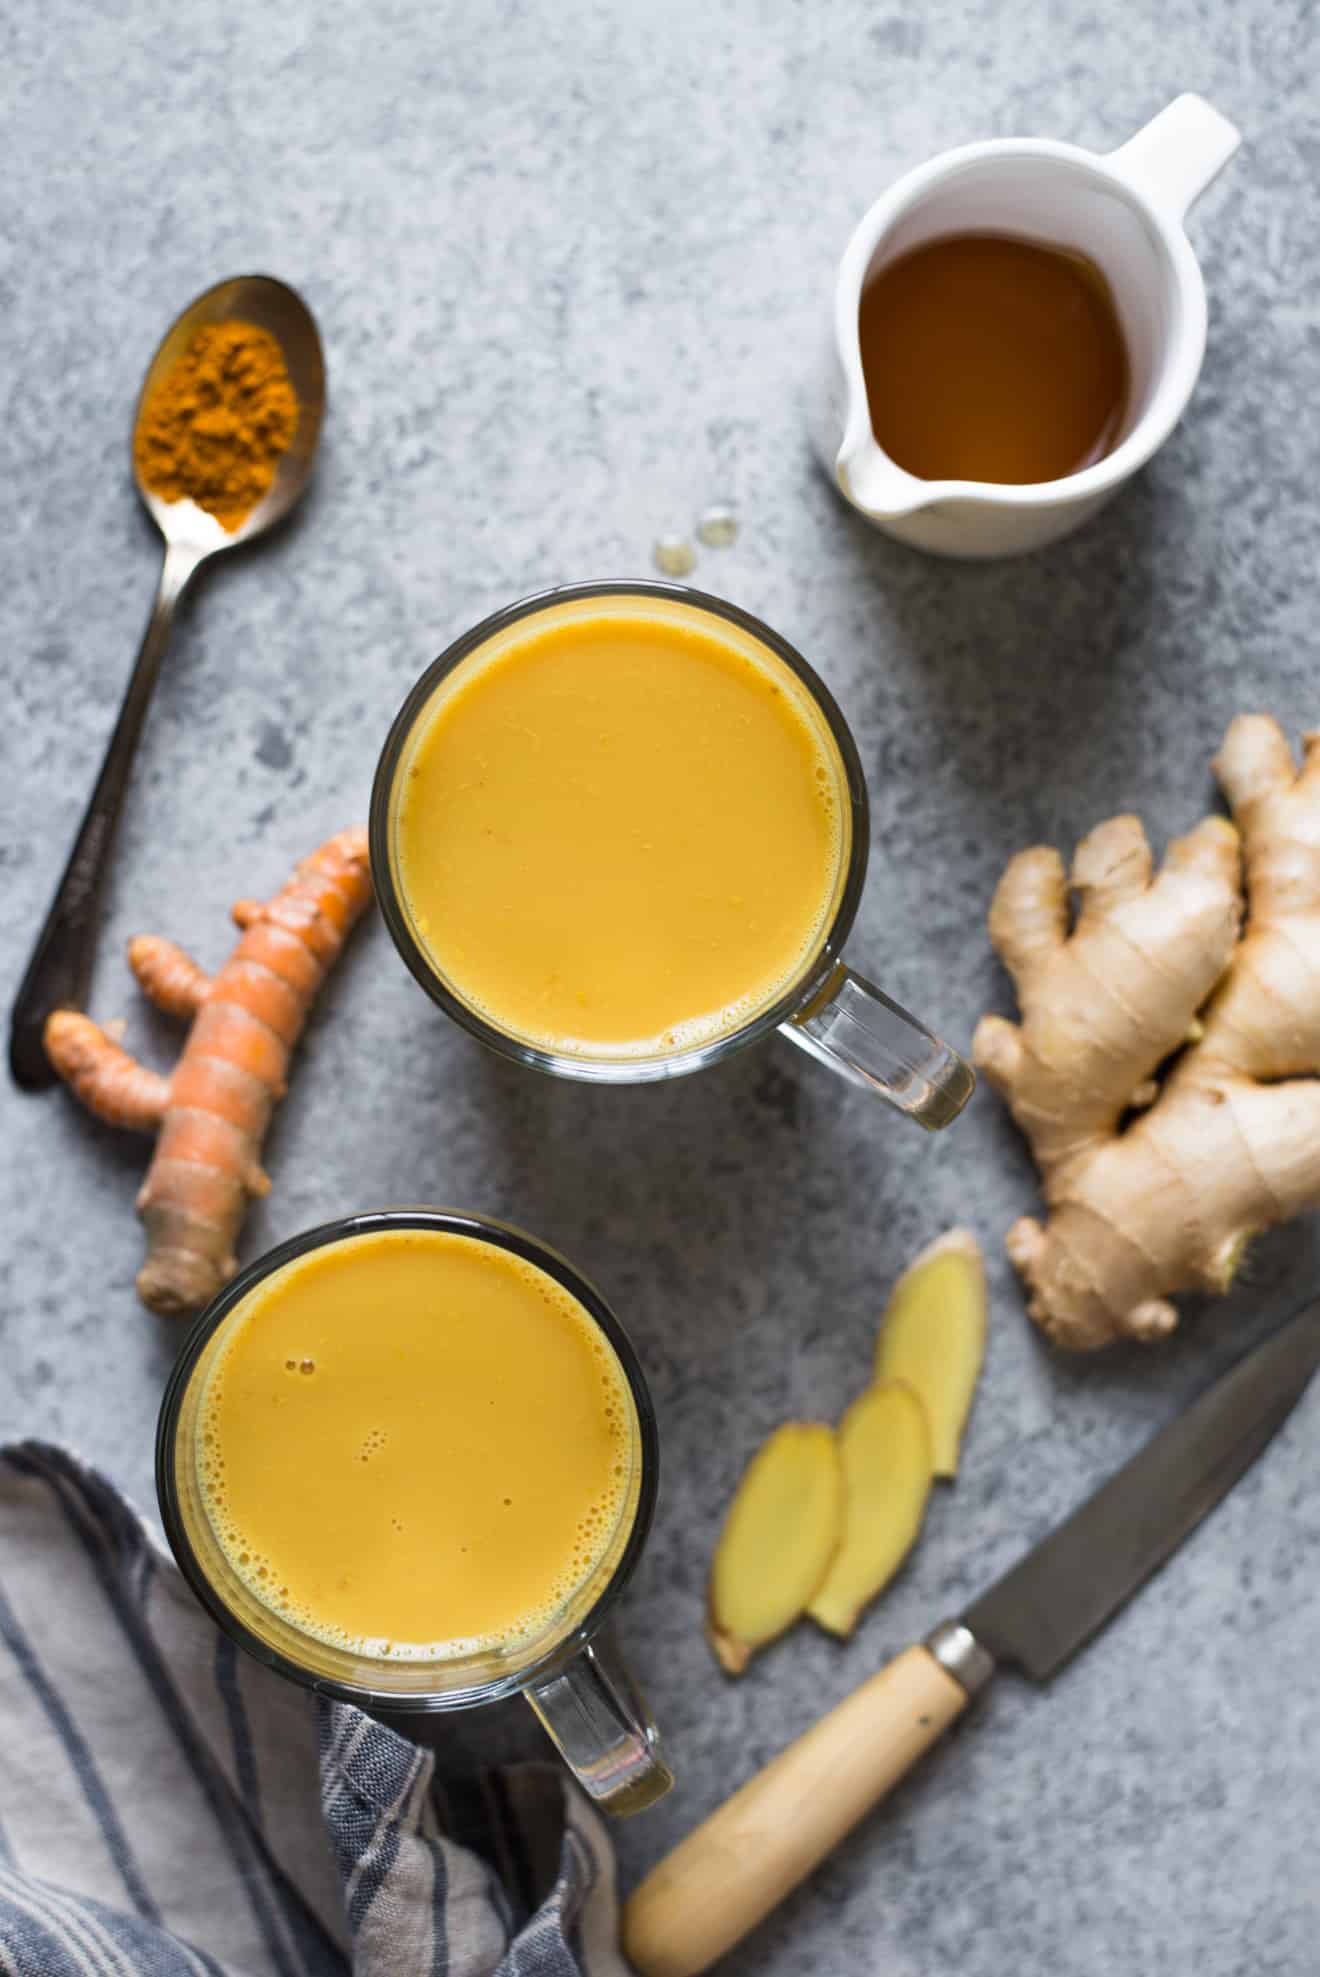 Golden Milk (or Turmeric Milk) is high in antioxidants and has anti-inflammatory properties. Making it at home is very easy. All you need is 5 basic ingredients